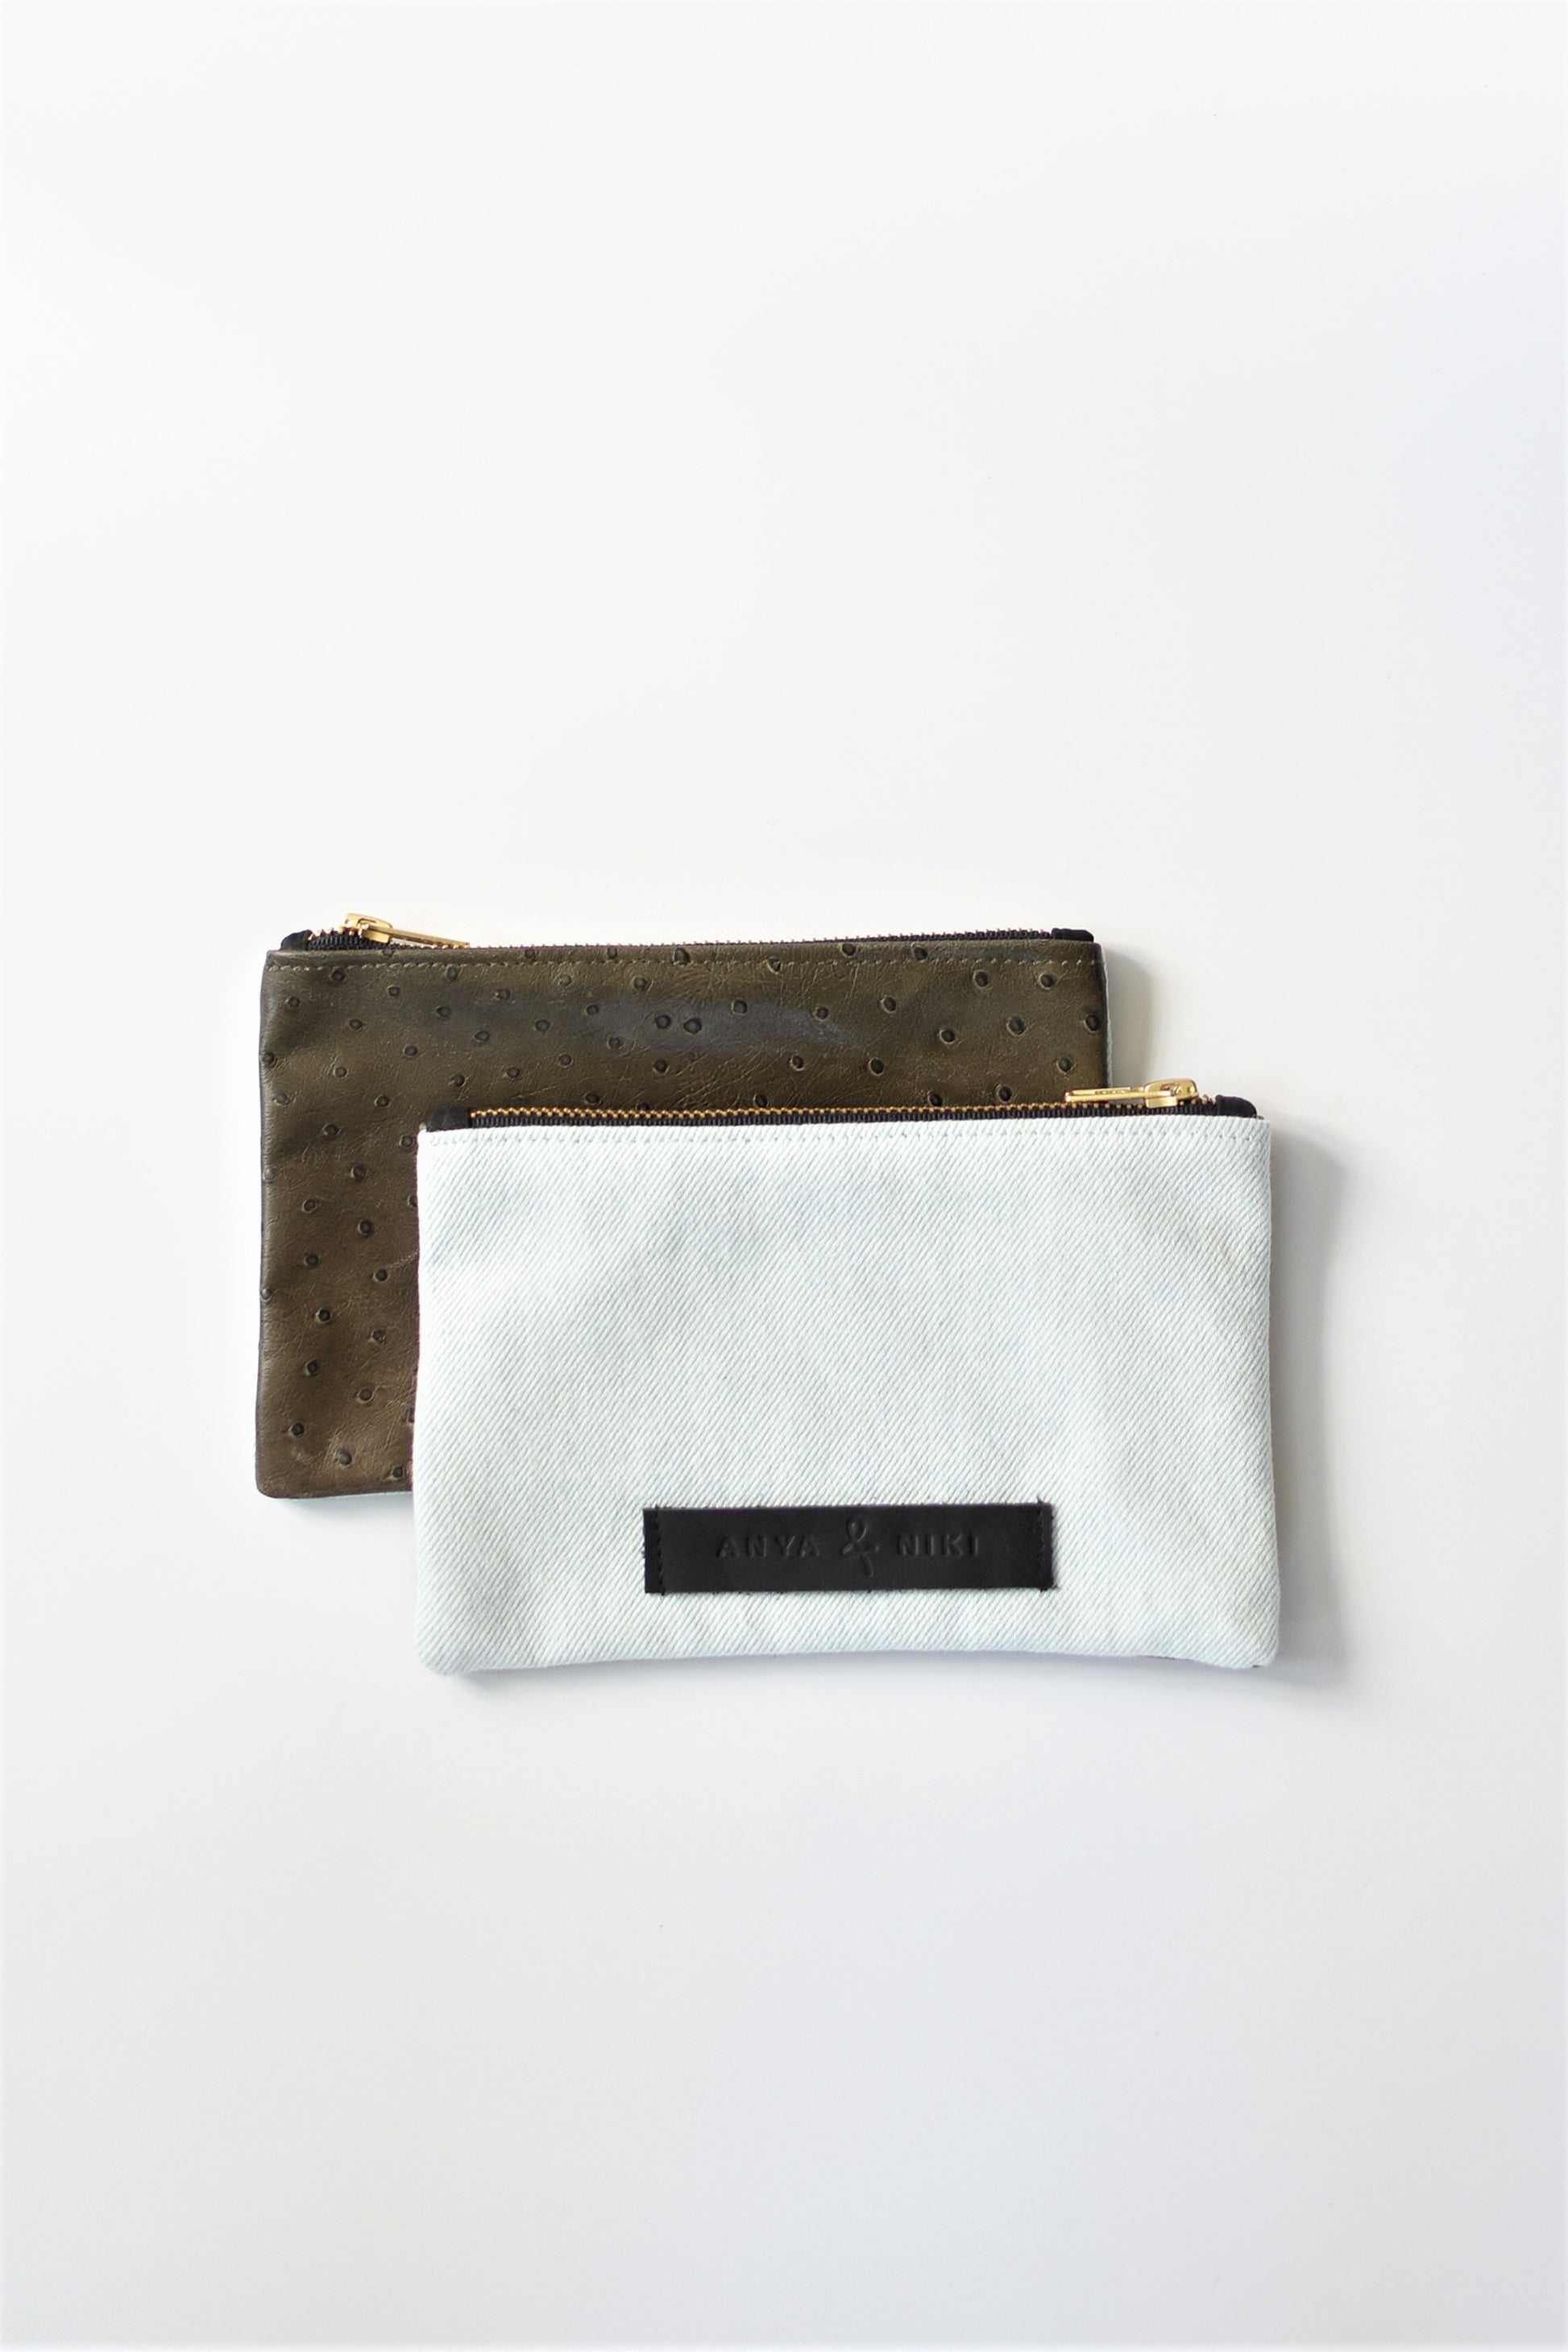 Bleached denim and fern colored embossed leather skin small pouch with brass zipper and leather logo label.